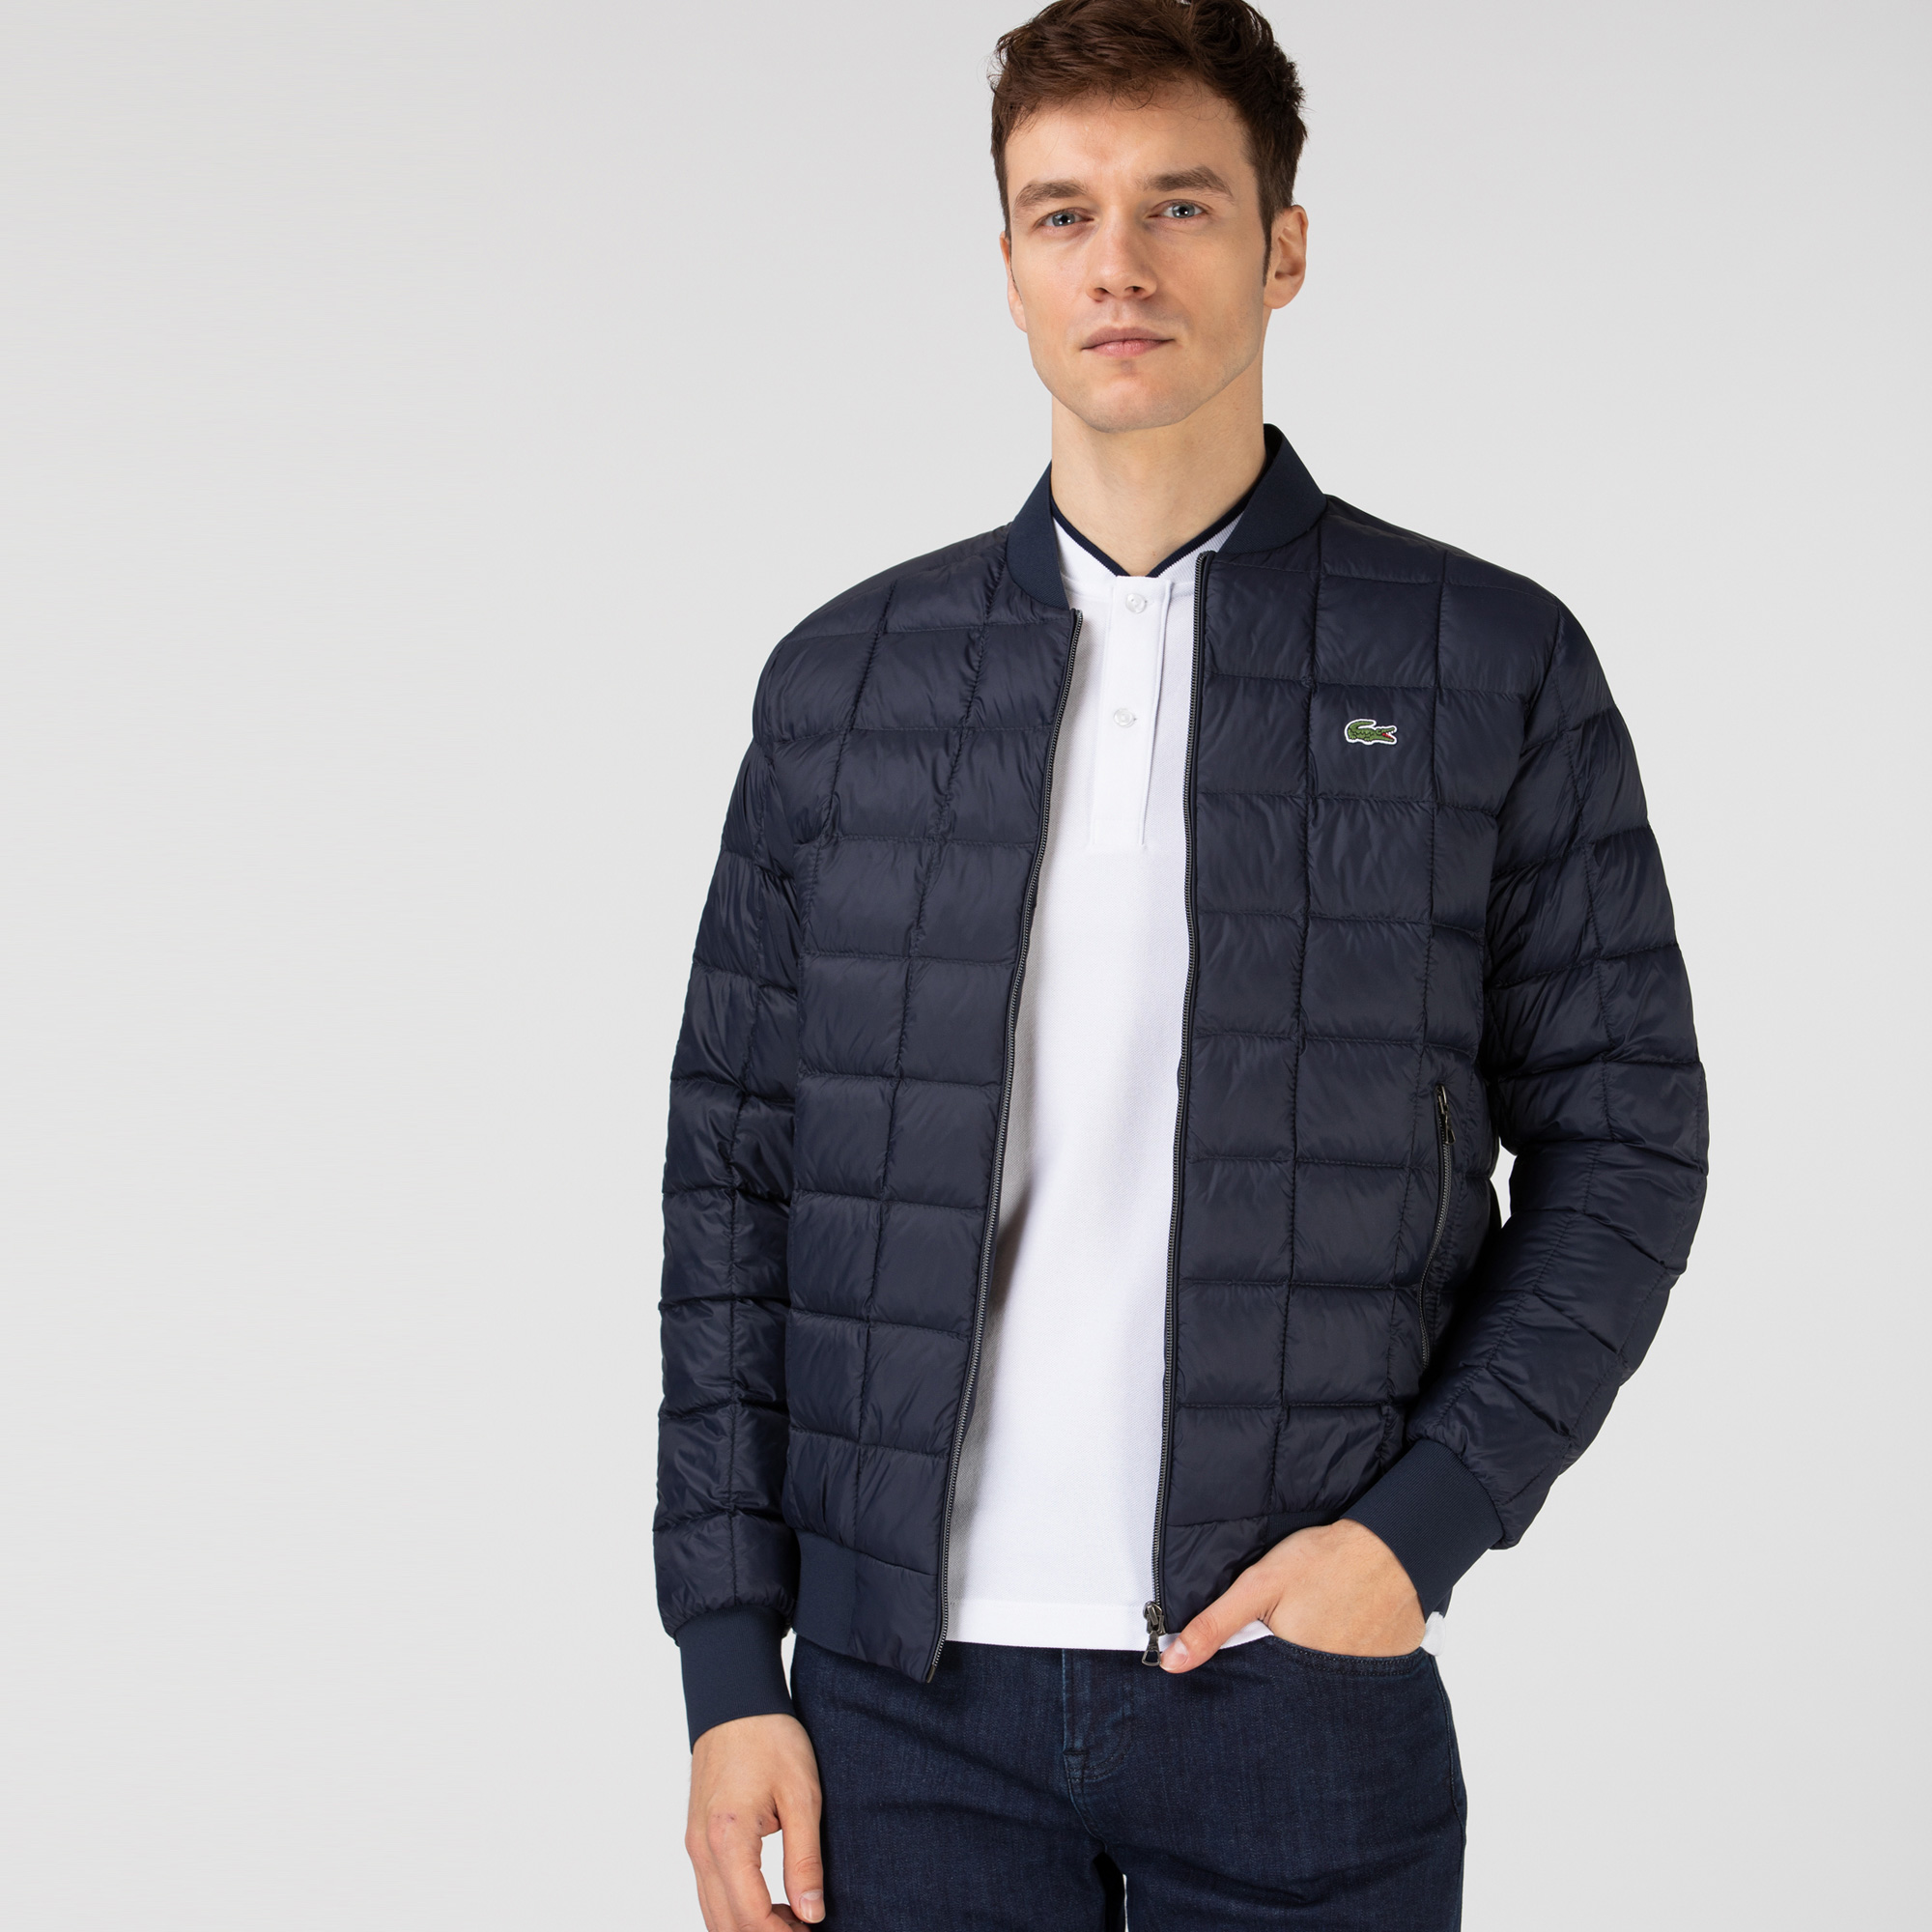 Lacoste quilted Jacket Men's BH0903 | Lacoste